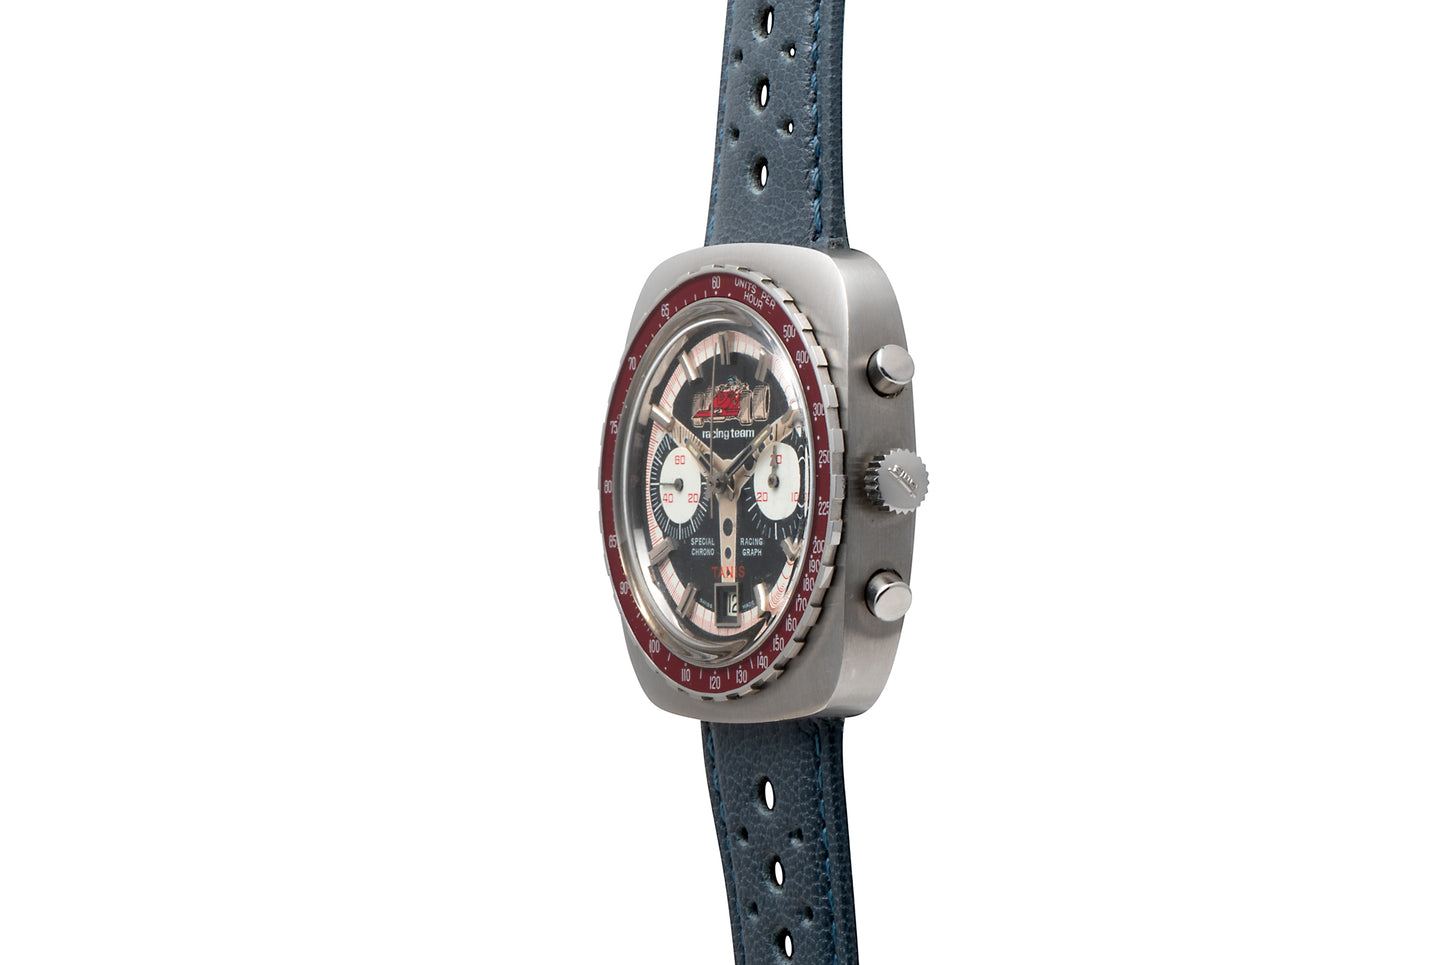 Tanis 'Special Racing Team' Chronograph